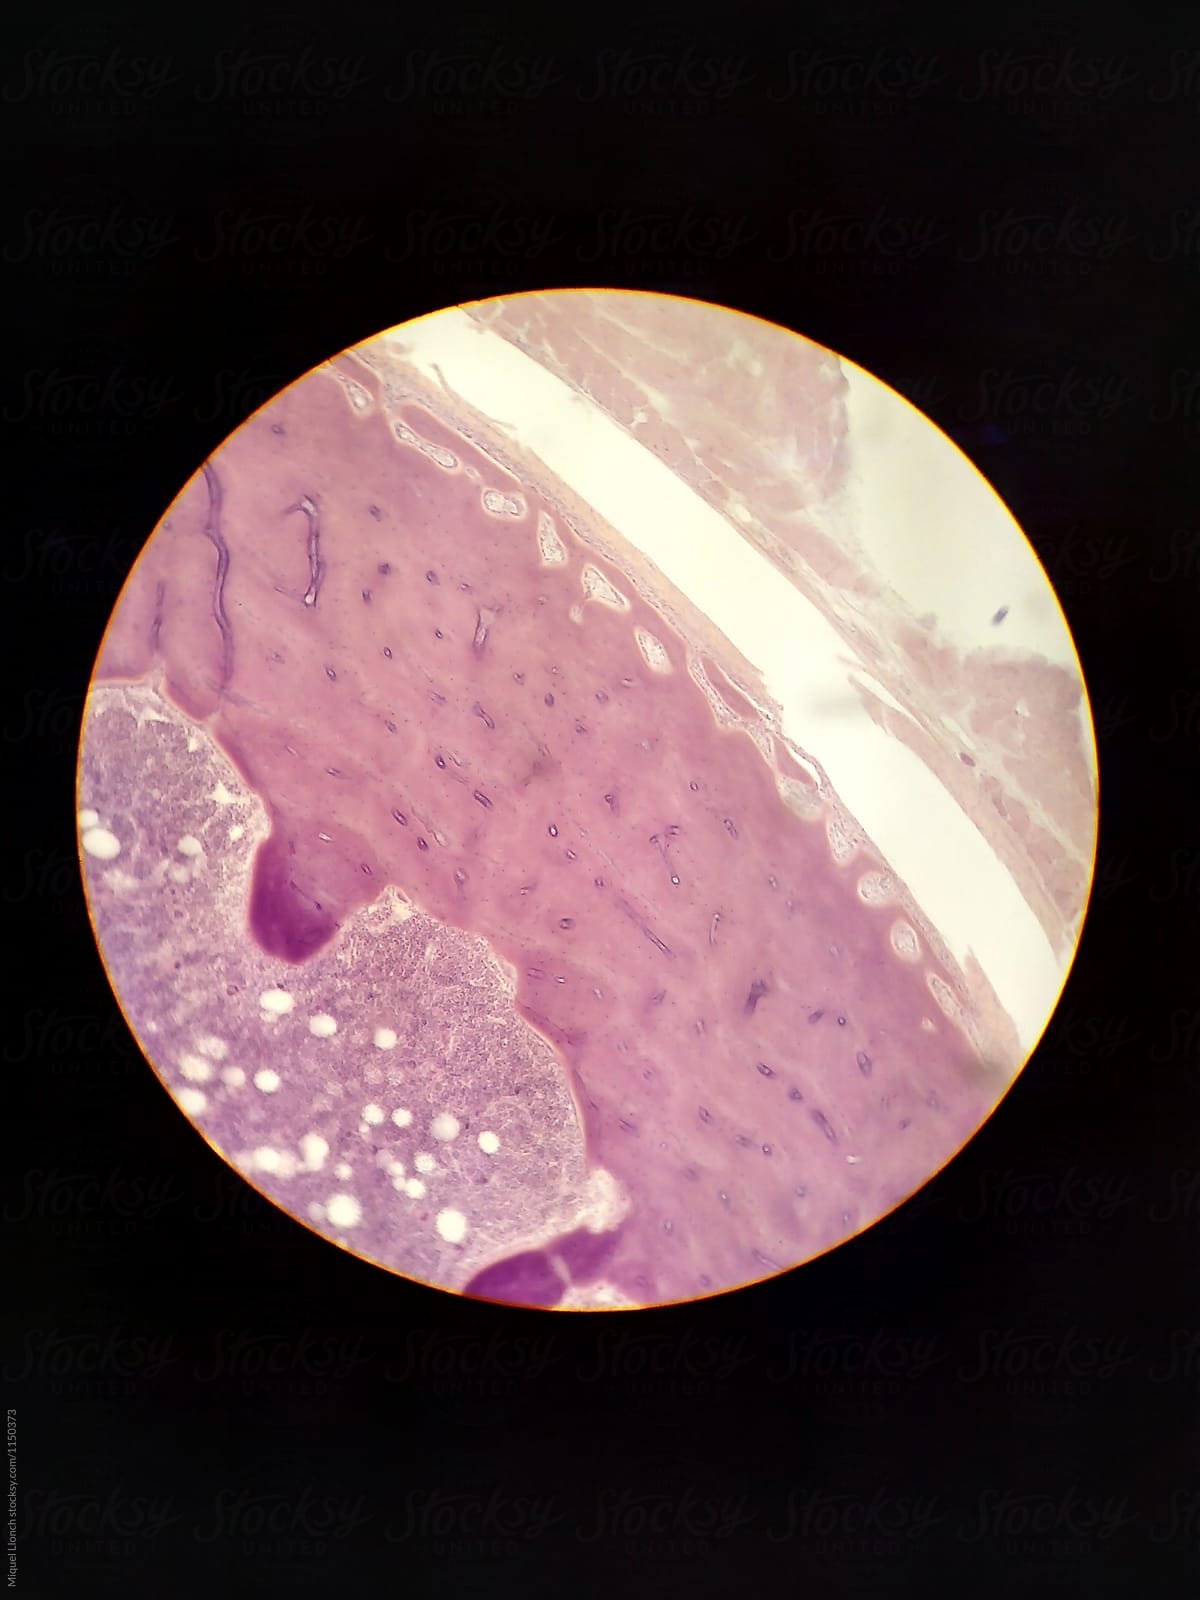 Microscope photography of different organic tissues made with a phone camera